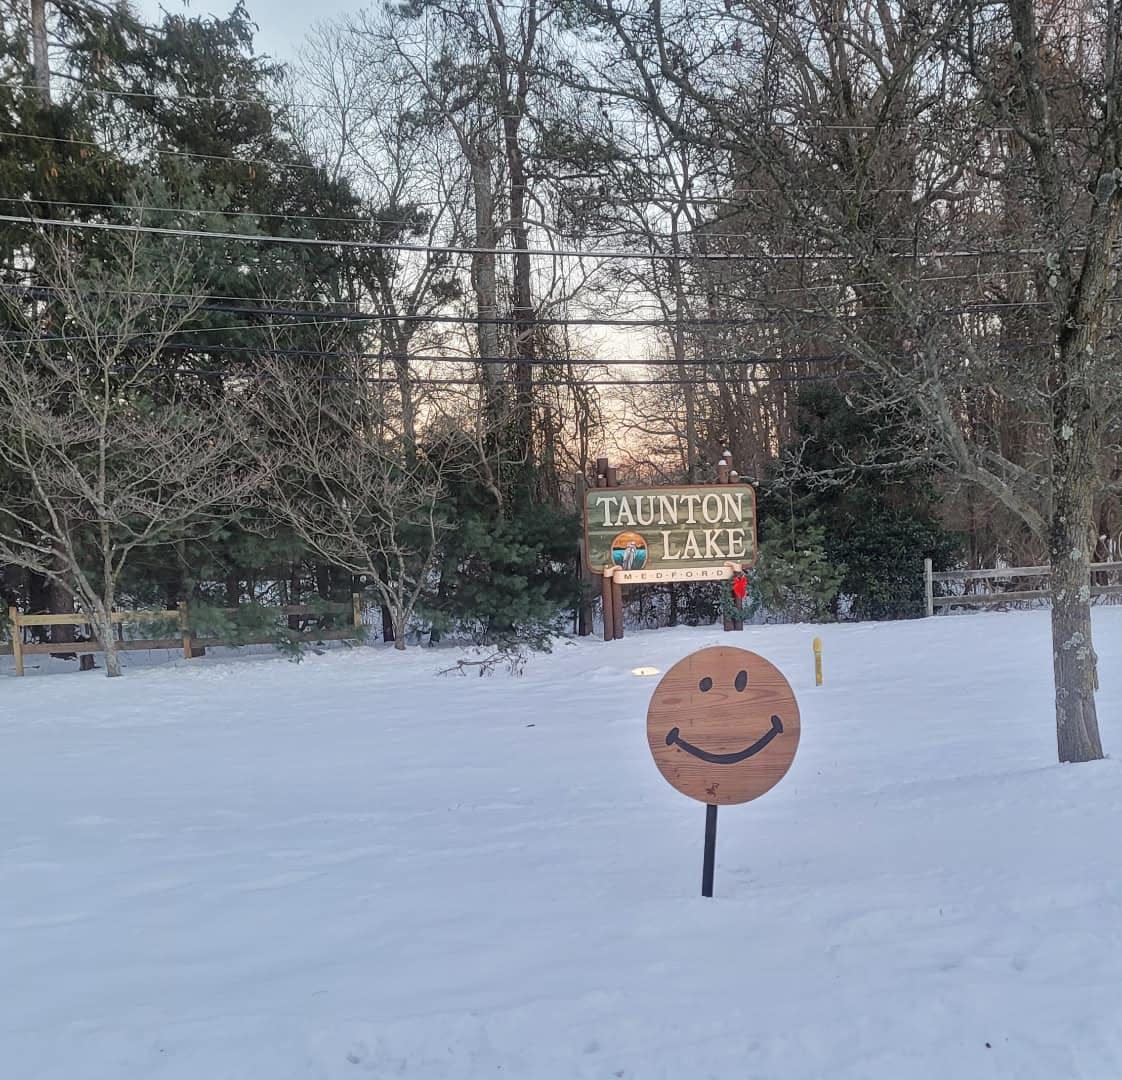 A mysterious series of smiley face signs have been springing up by Taunton Lake for a few years now, and Medford residents want to know who to thank.